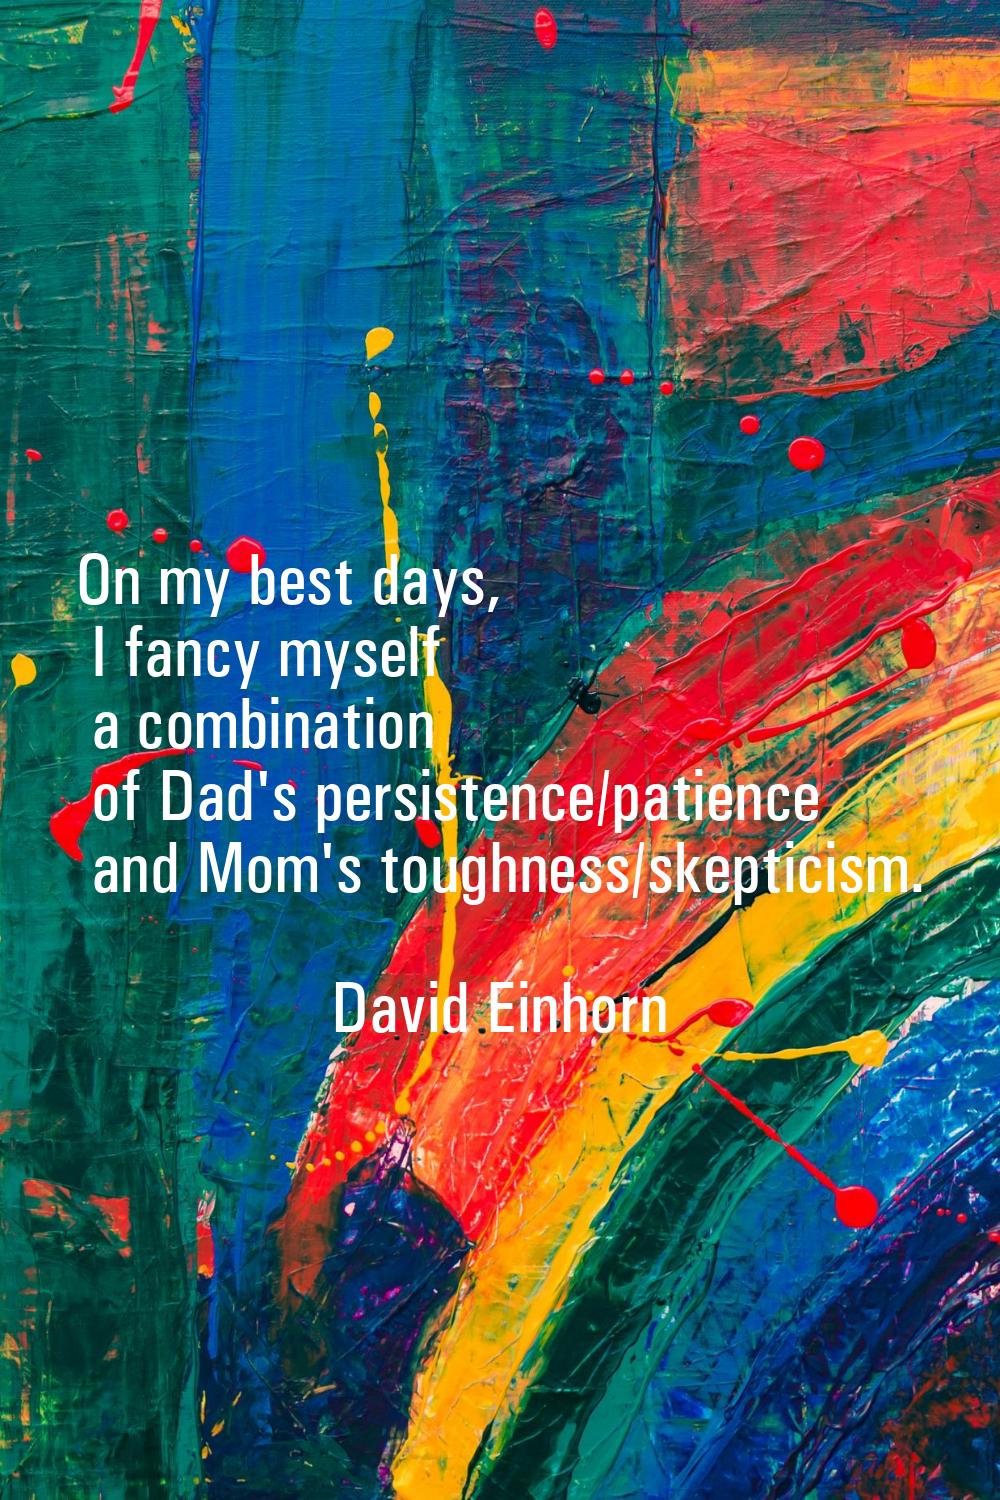 On my best days, I fancy myself a combination of Dad's persistence/patience and Mom's toughness/ske